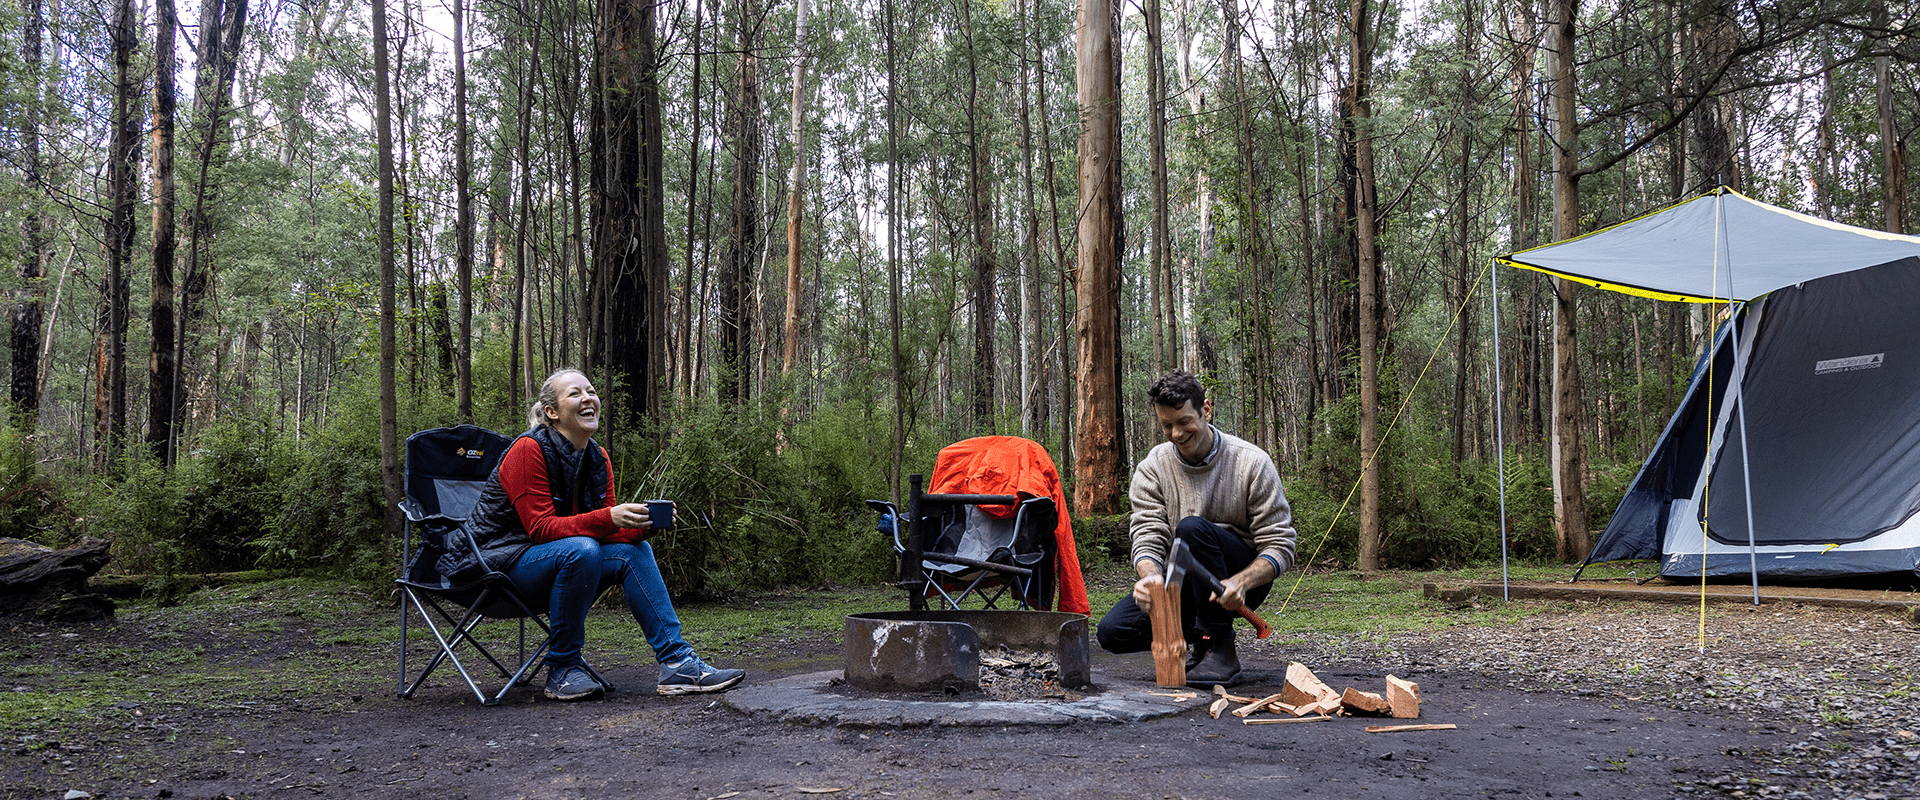 Two campers sit around a campfire, the male is splitting kindling to start a campfire. A tent is surrounded by tall trees and bush.